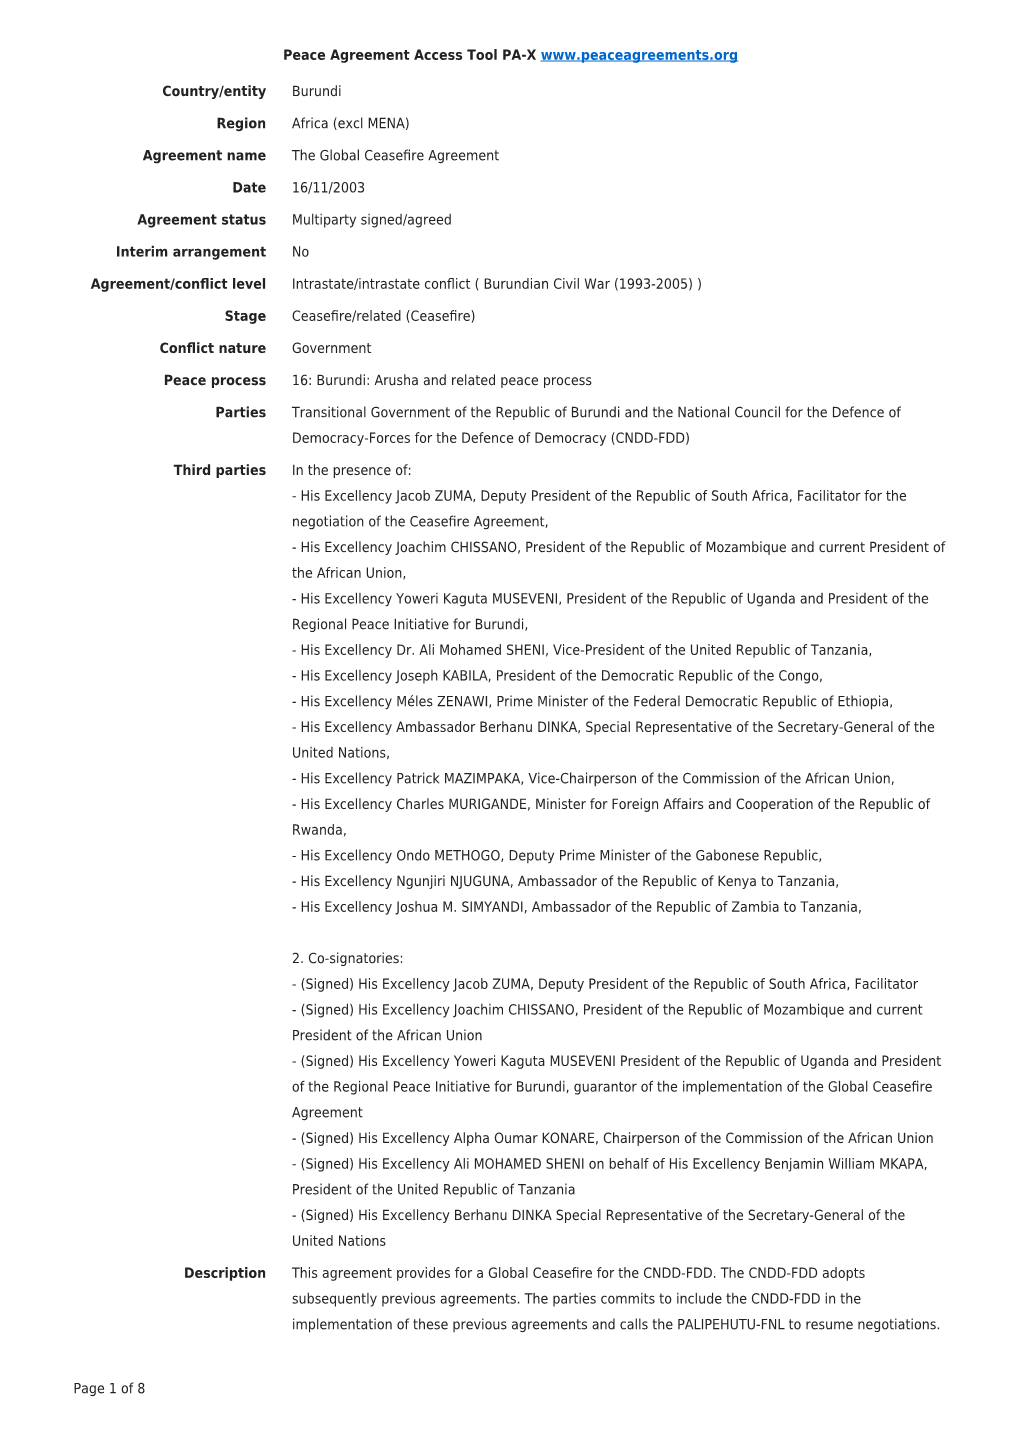 Peace Agreement Access Tool PA-X Page 1 of 8 Country/Entity Burundi Region Africa (Excl MENA) Agreement